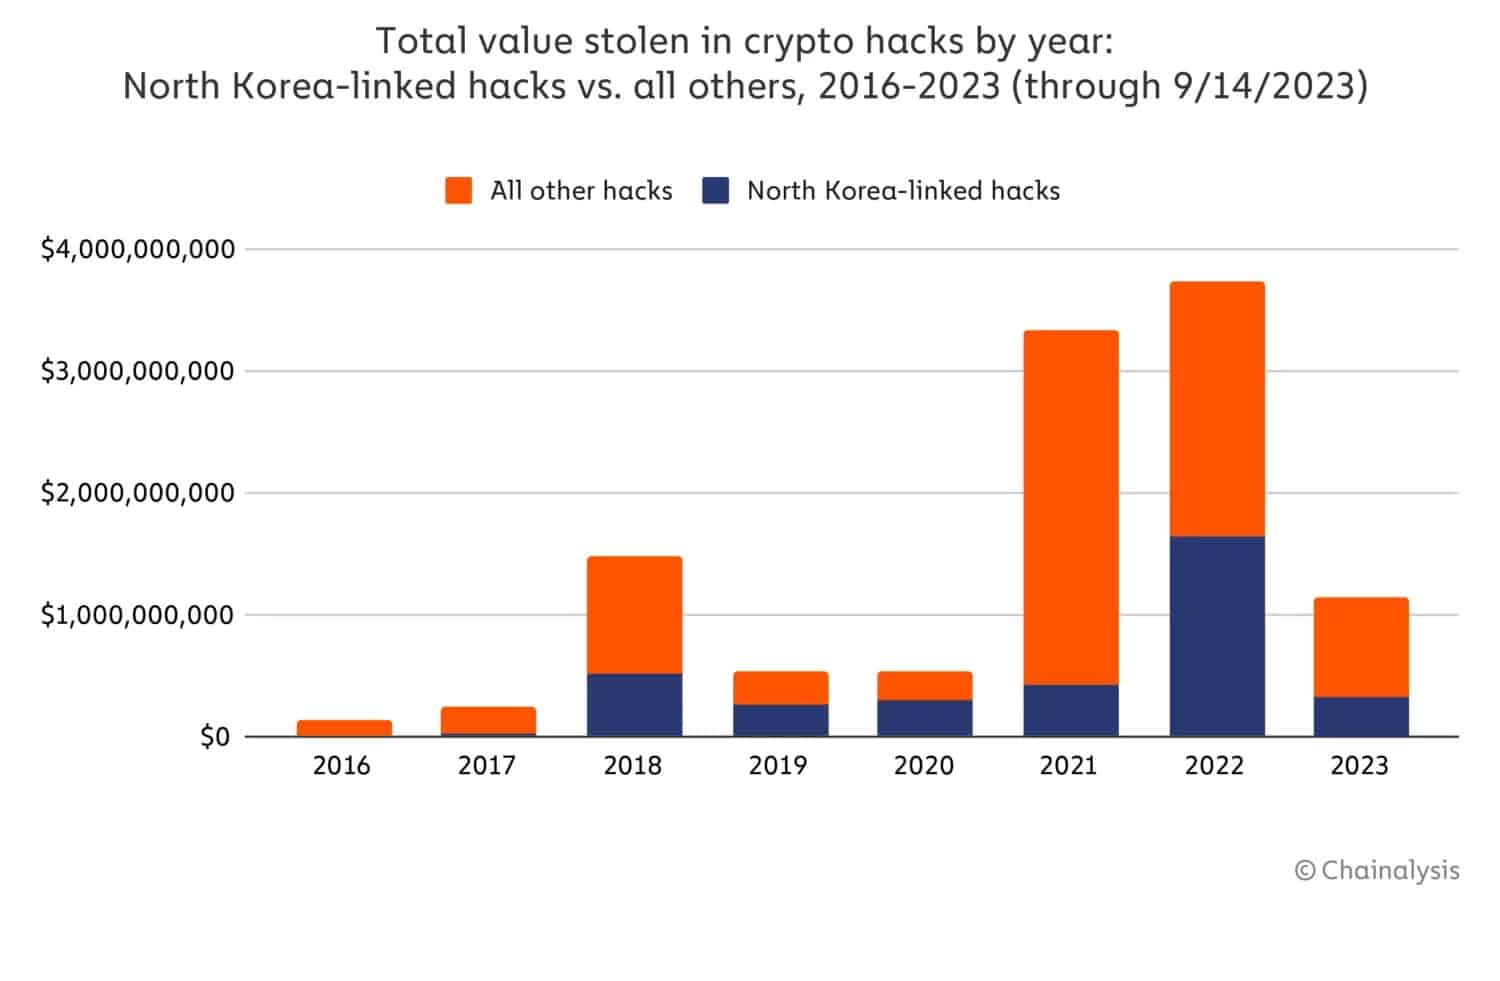 Figure 2 - Comparison between all crypto hacks and those from North Korea